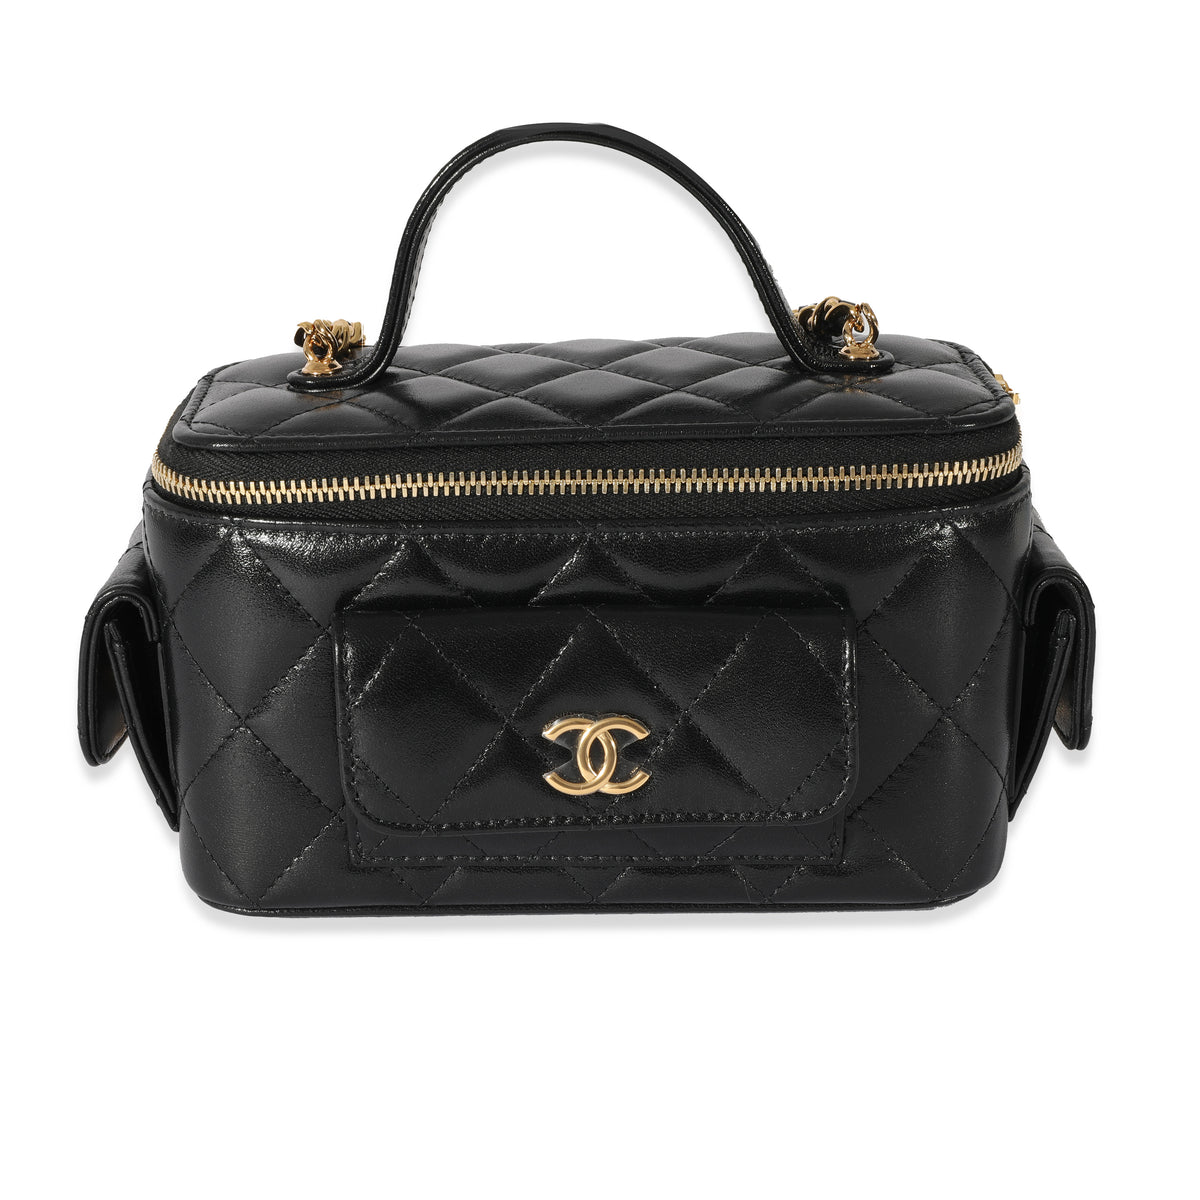 Chanel 22K Black Leather Vanity With Chain, myGemma